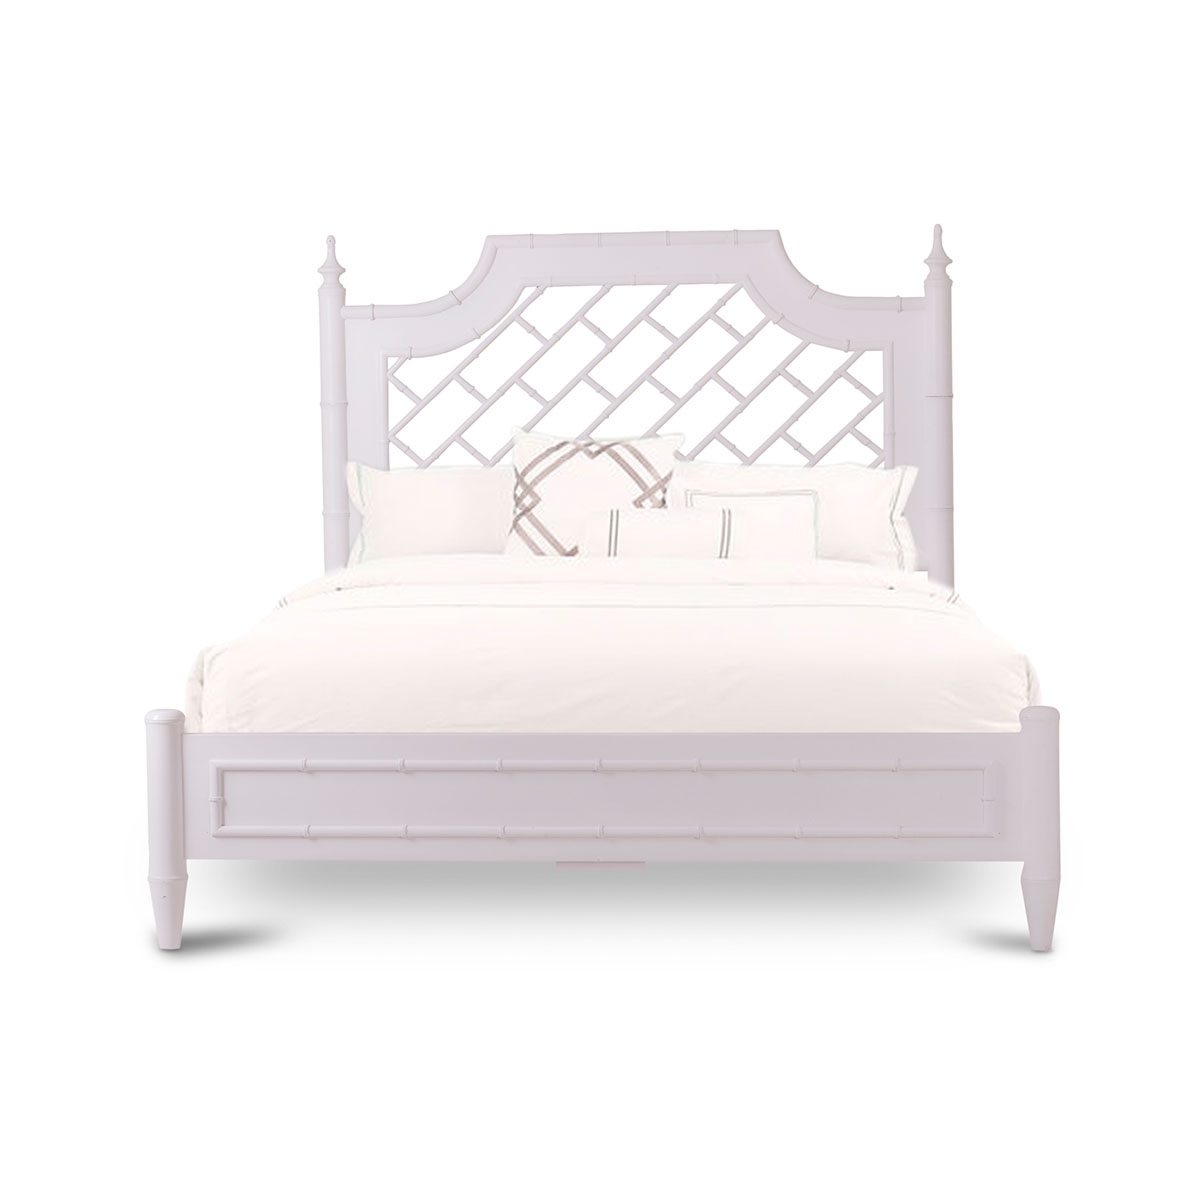 Chelsea King Bed